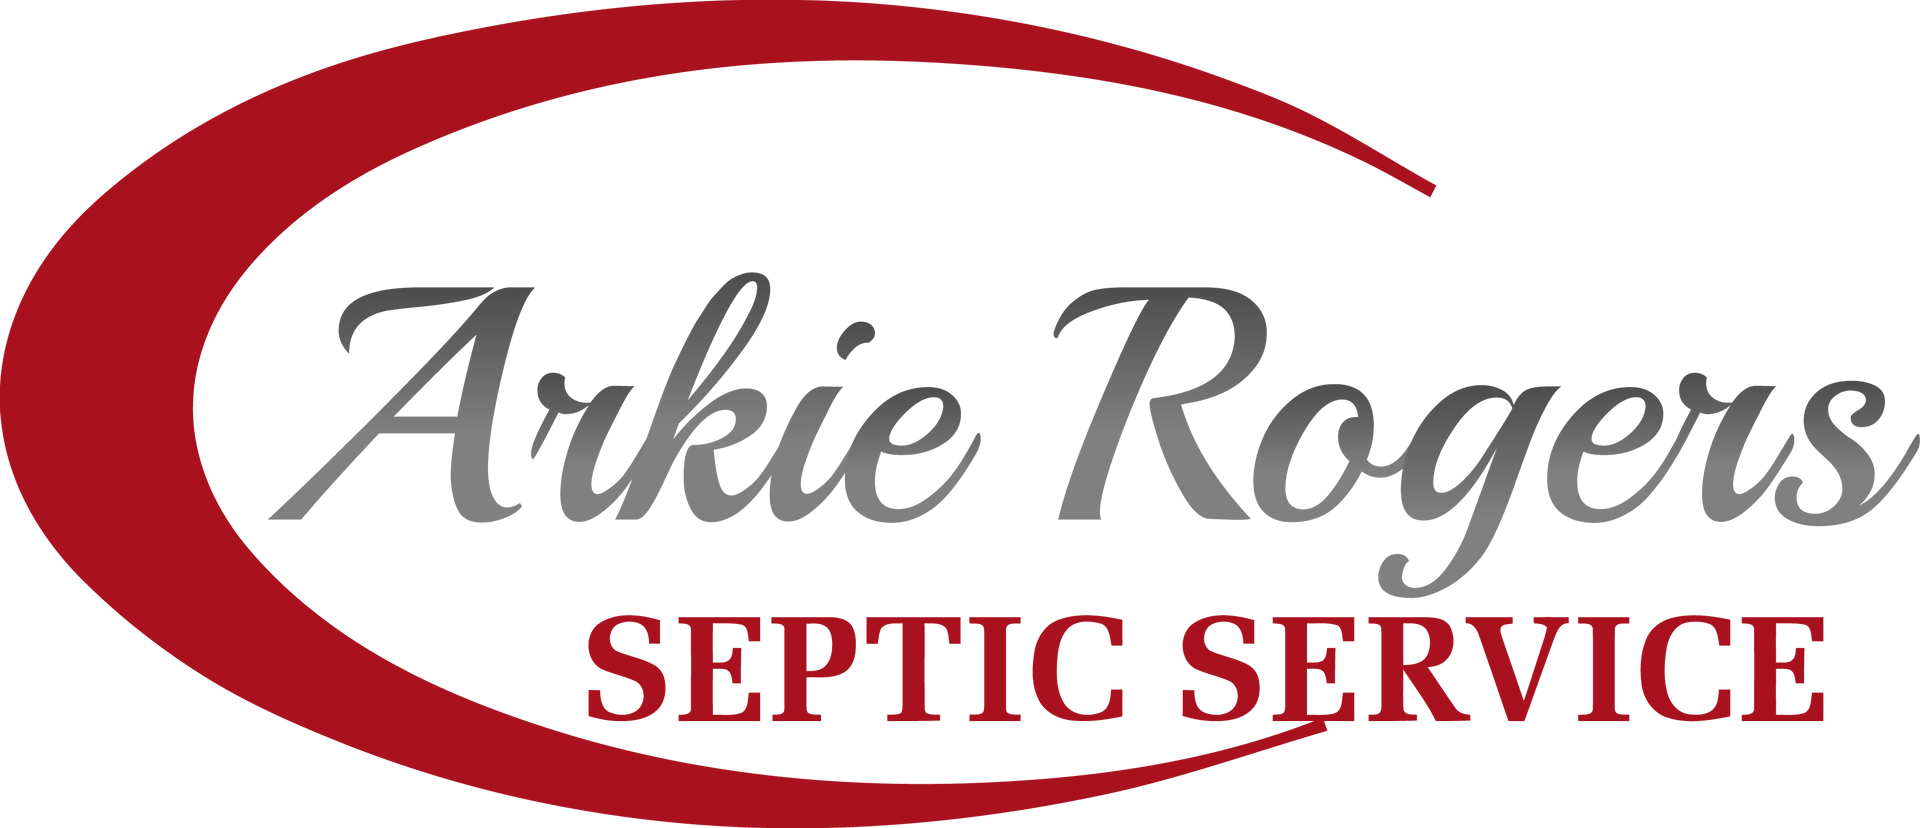 The logo for arkie rogers septic service is red and white.